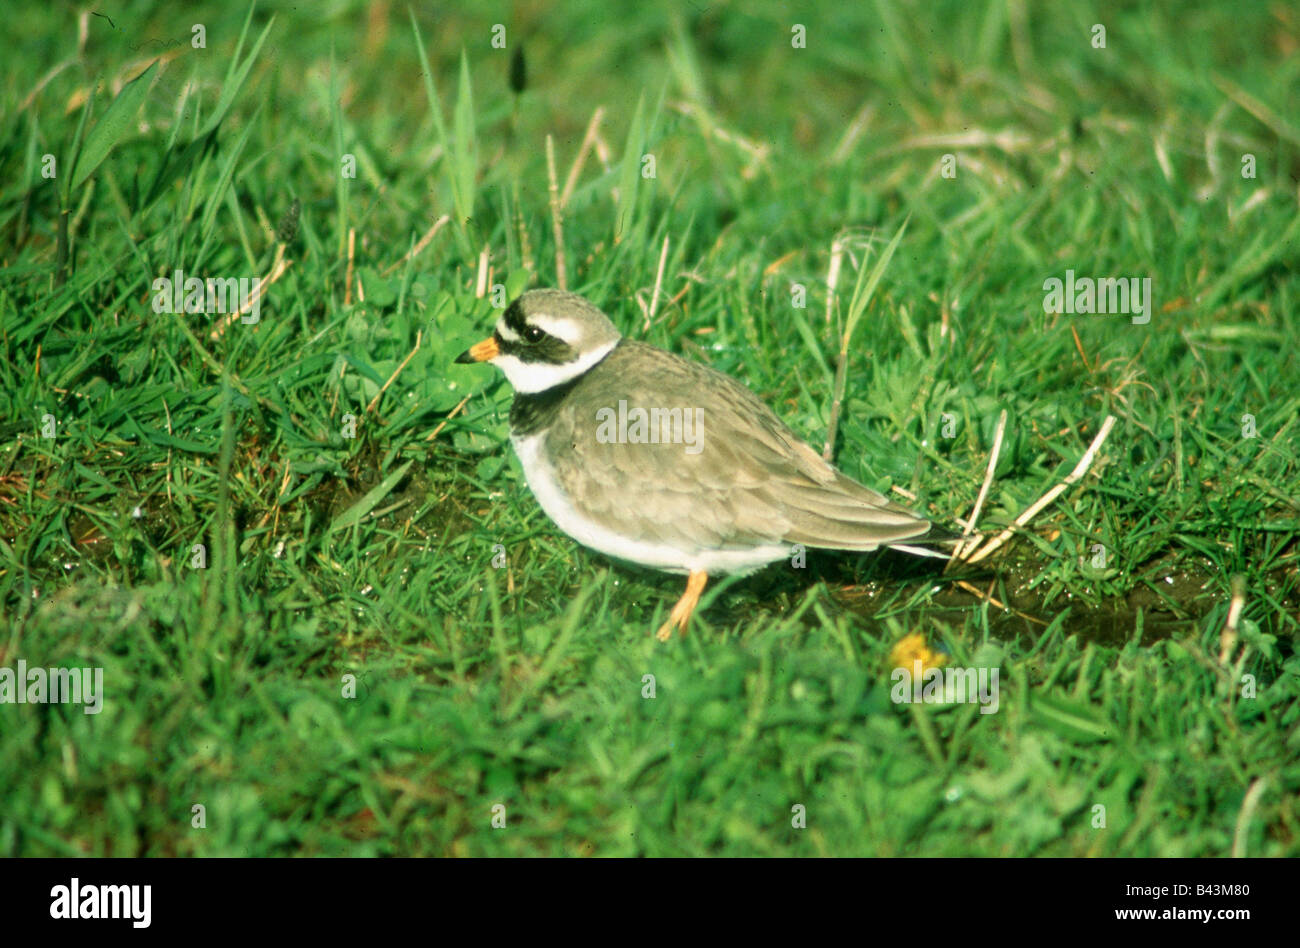 zoology / animals, avian / bird, Charadriidae, Ringed Plover (Charadrius hiaticula), standing in grass, Texel, Netherlands, distribution: Europe, Additional-Rights-Clearance-Info-Not-Available Stock Photo